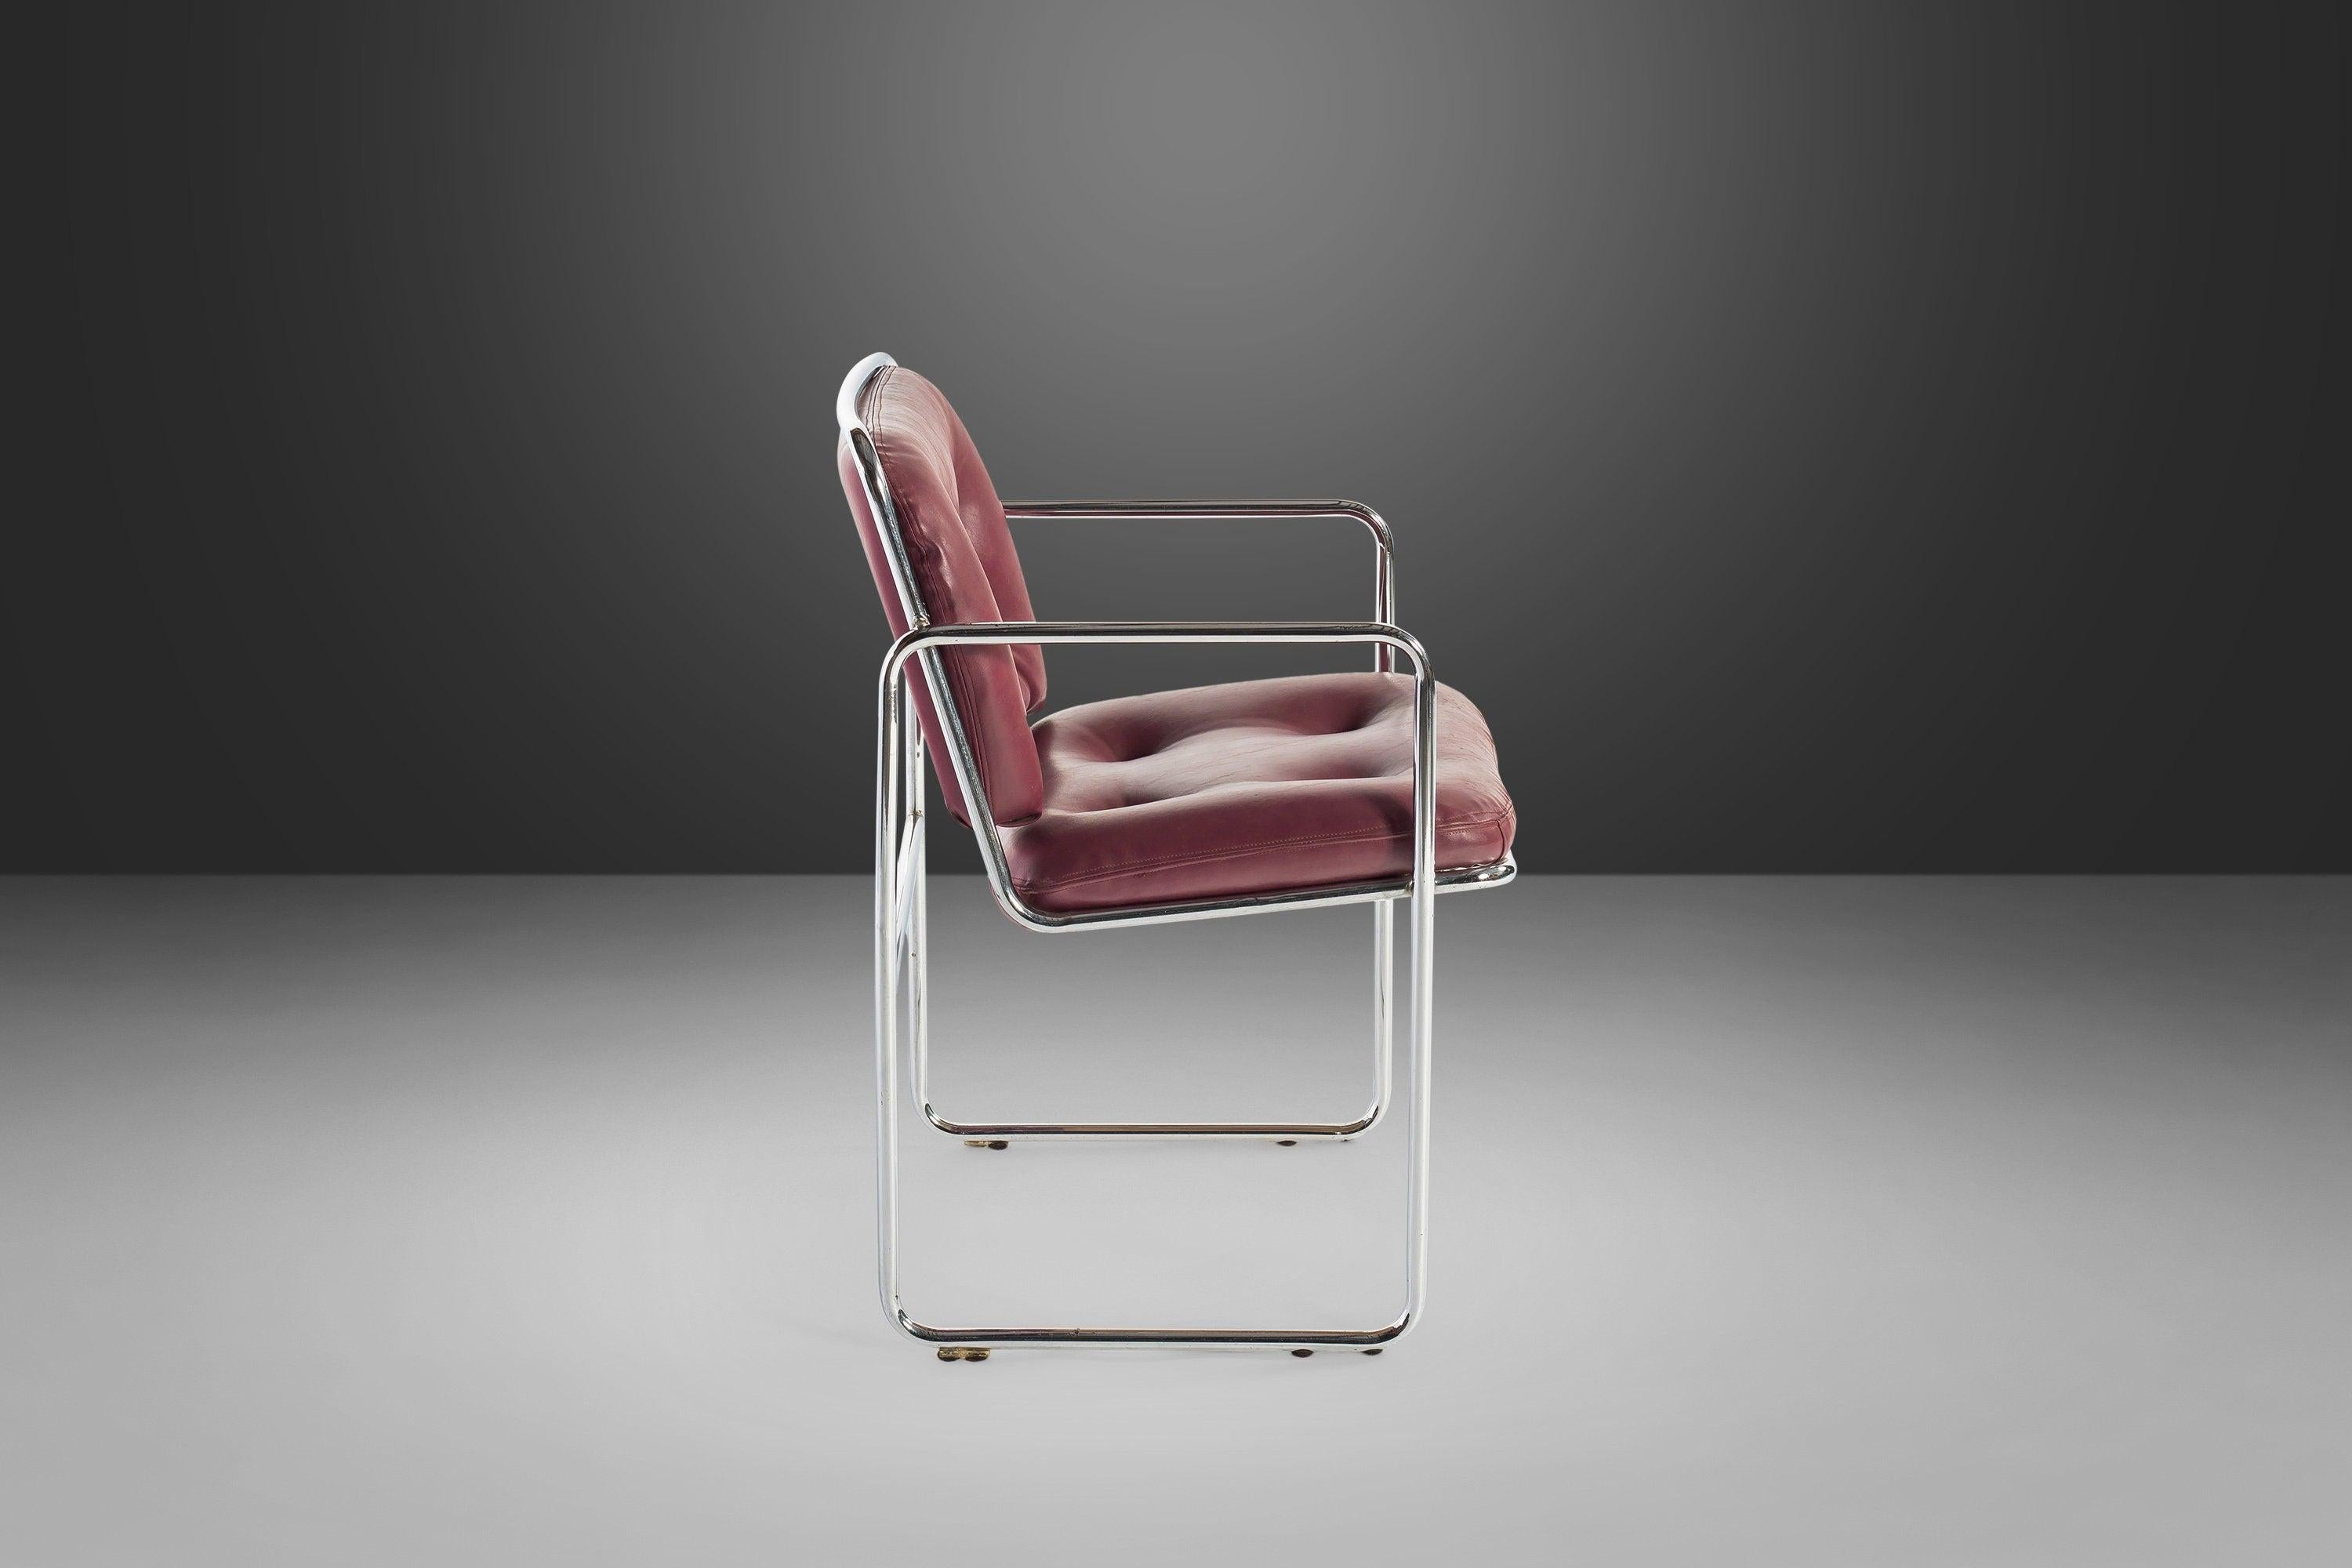 MCM Tubular Chrome Lounge Chairs by Chromcraft with Rich Oxblood Seats, c. 1960s For Sale 3